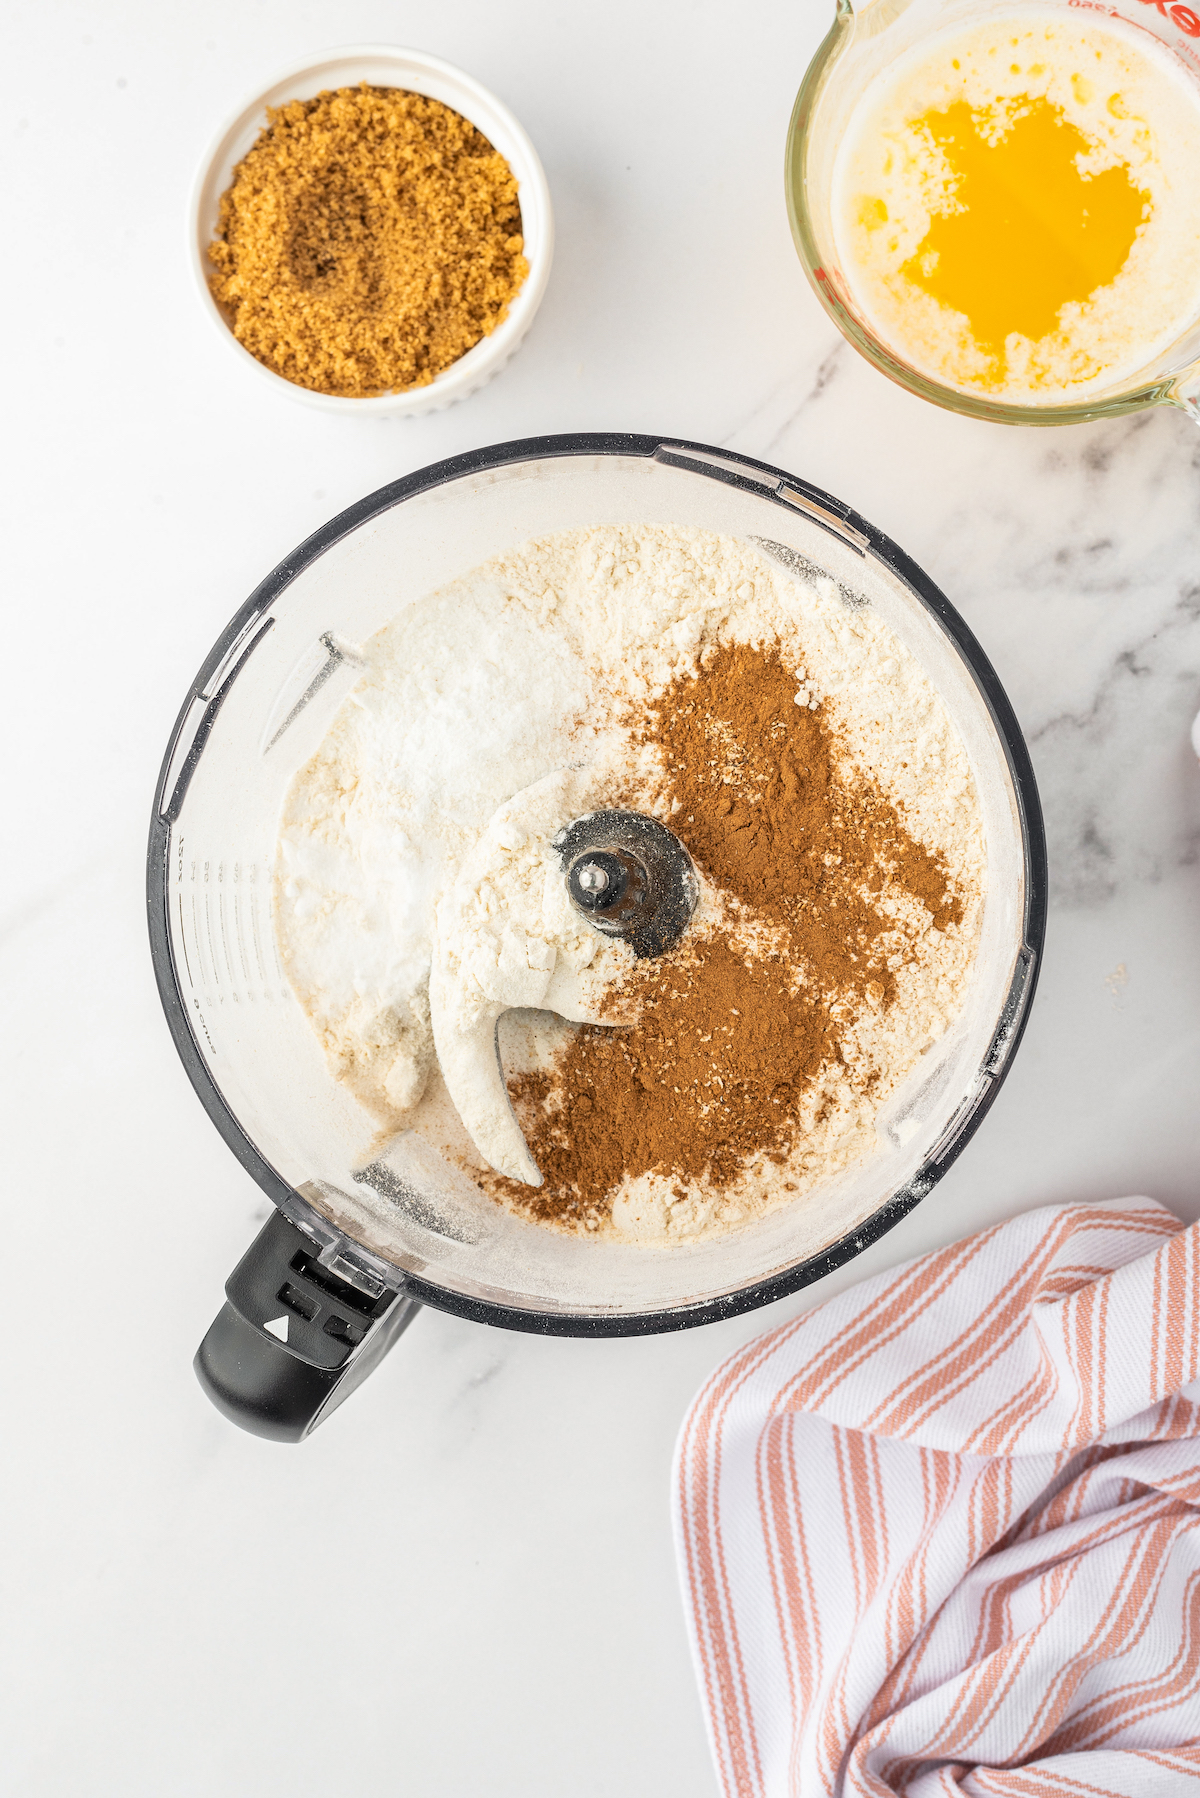 Overhead shot of a food processor with flour, ground oats, and spices inside.